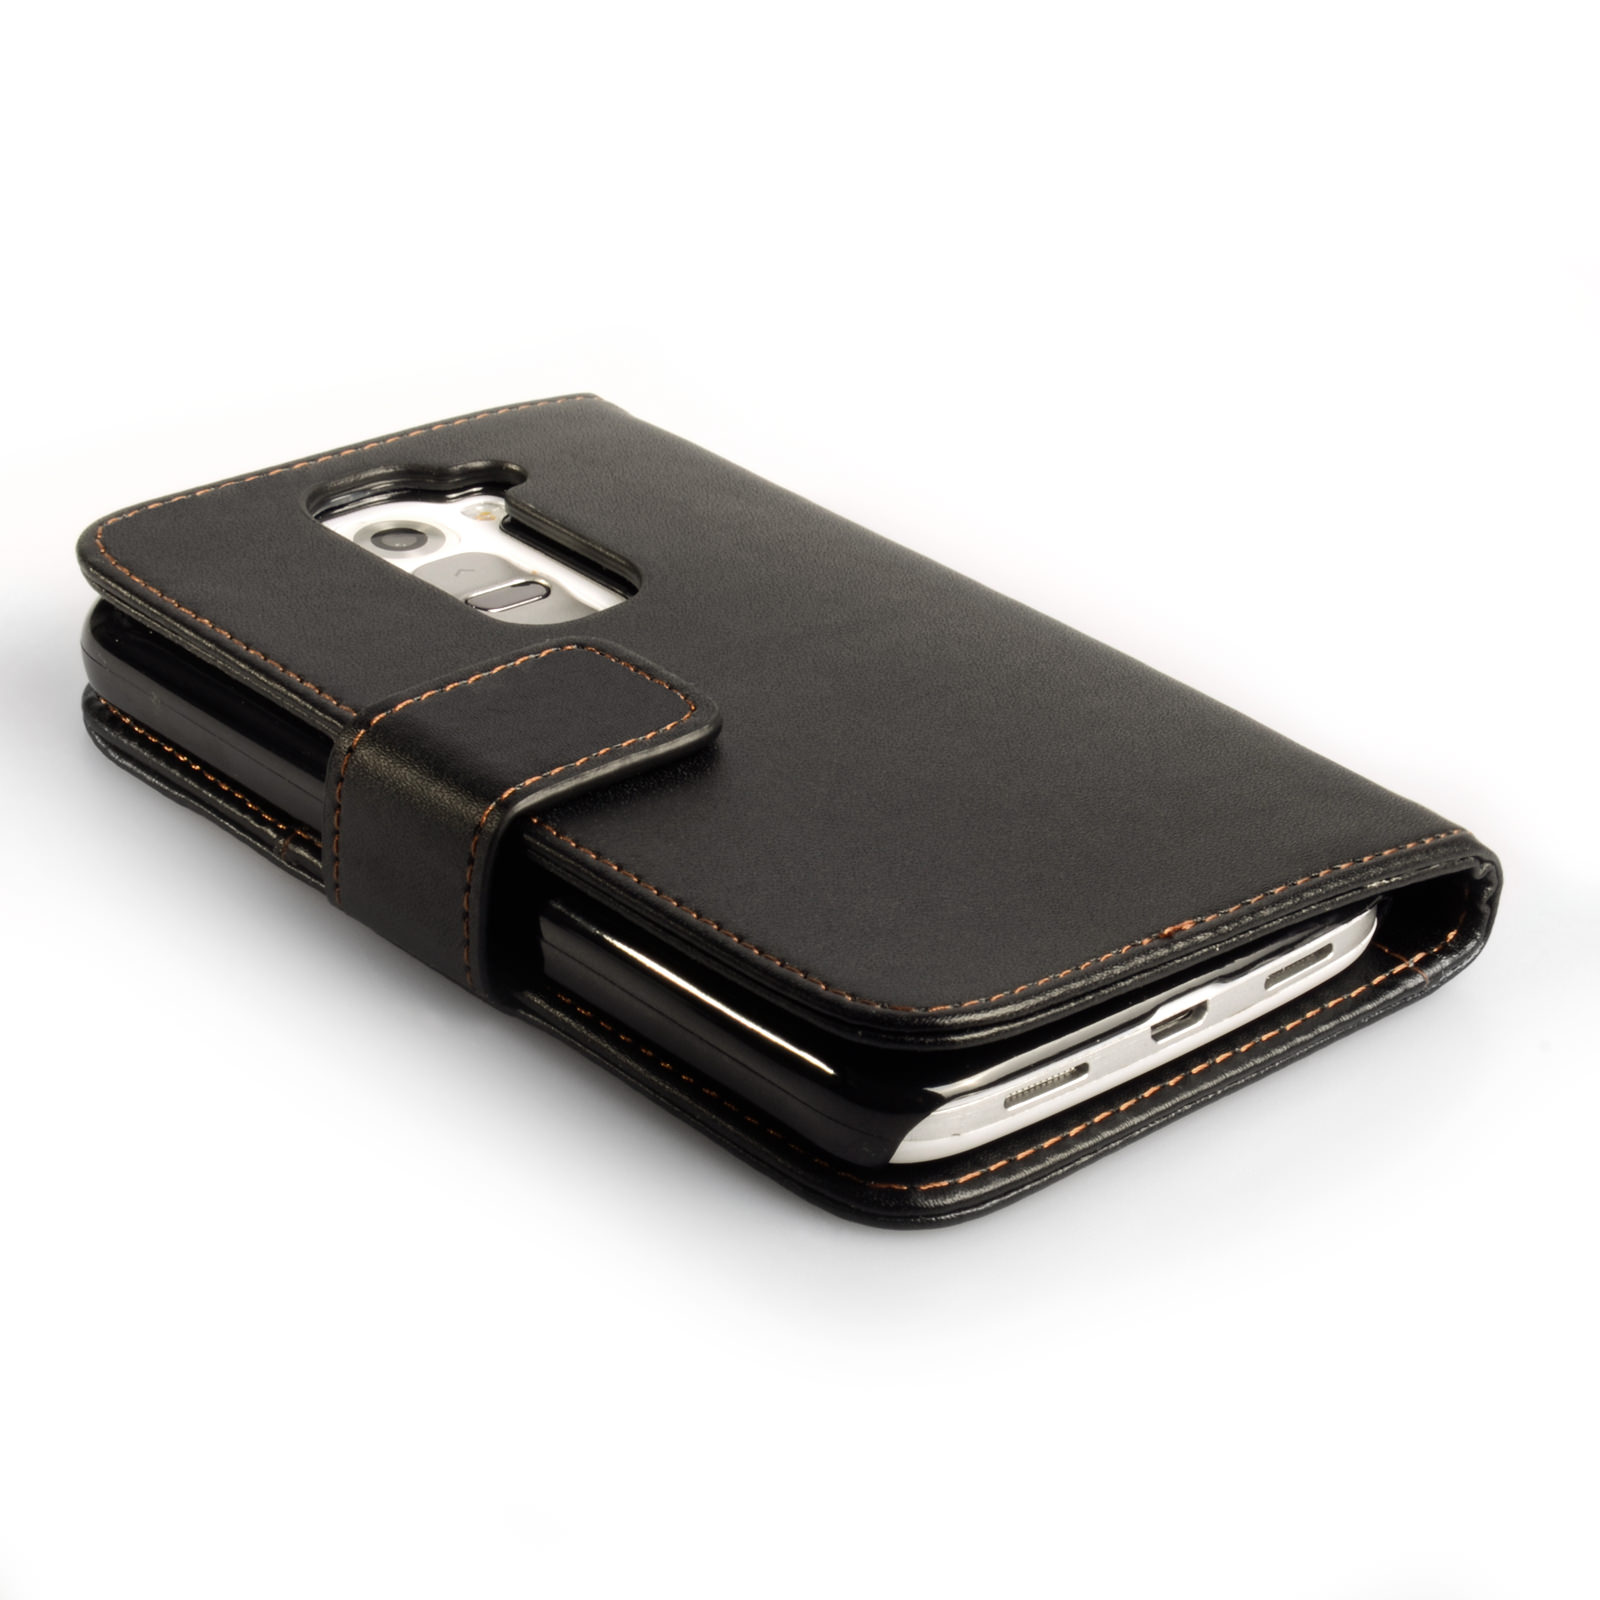 YouSave Accessories LG G2 Mini Leather-Effect Wallet Case - Black